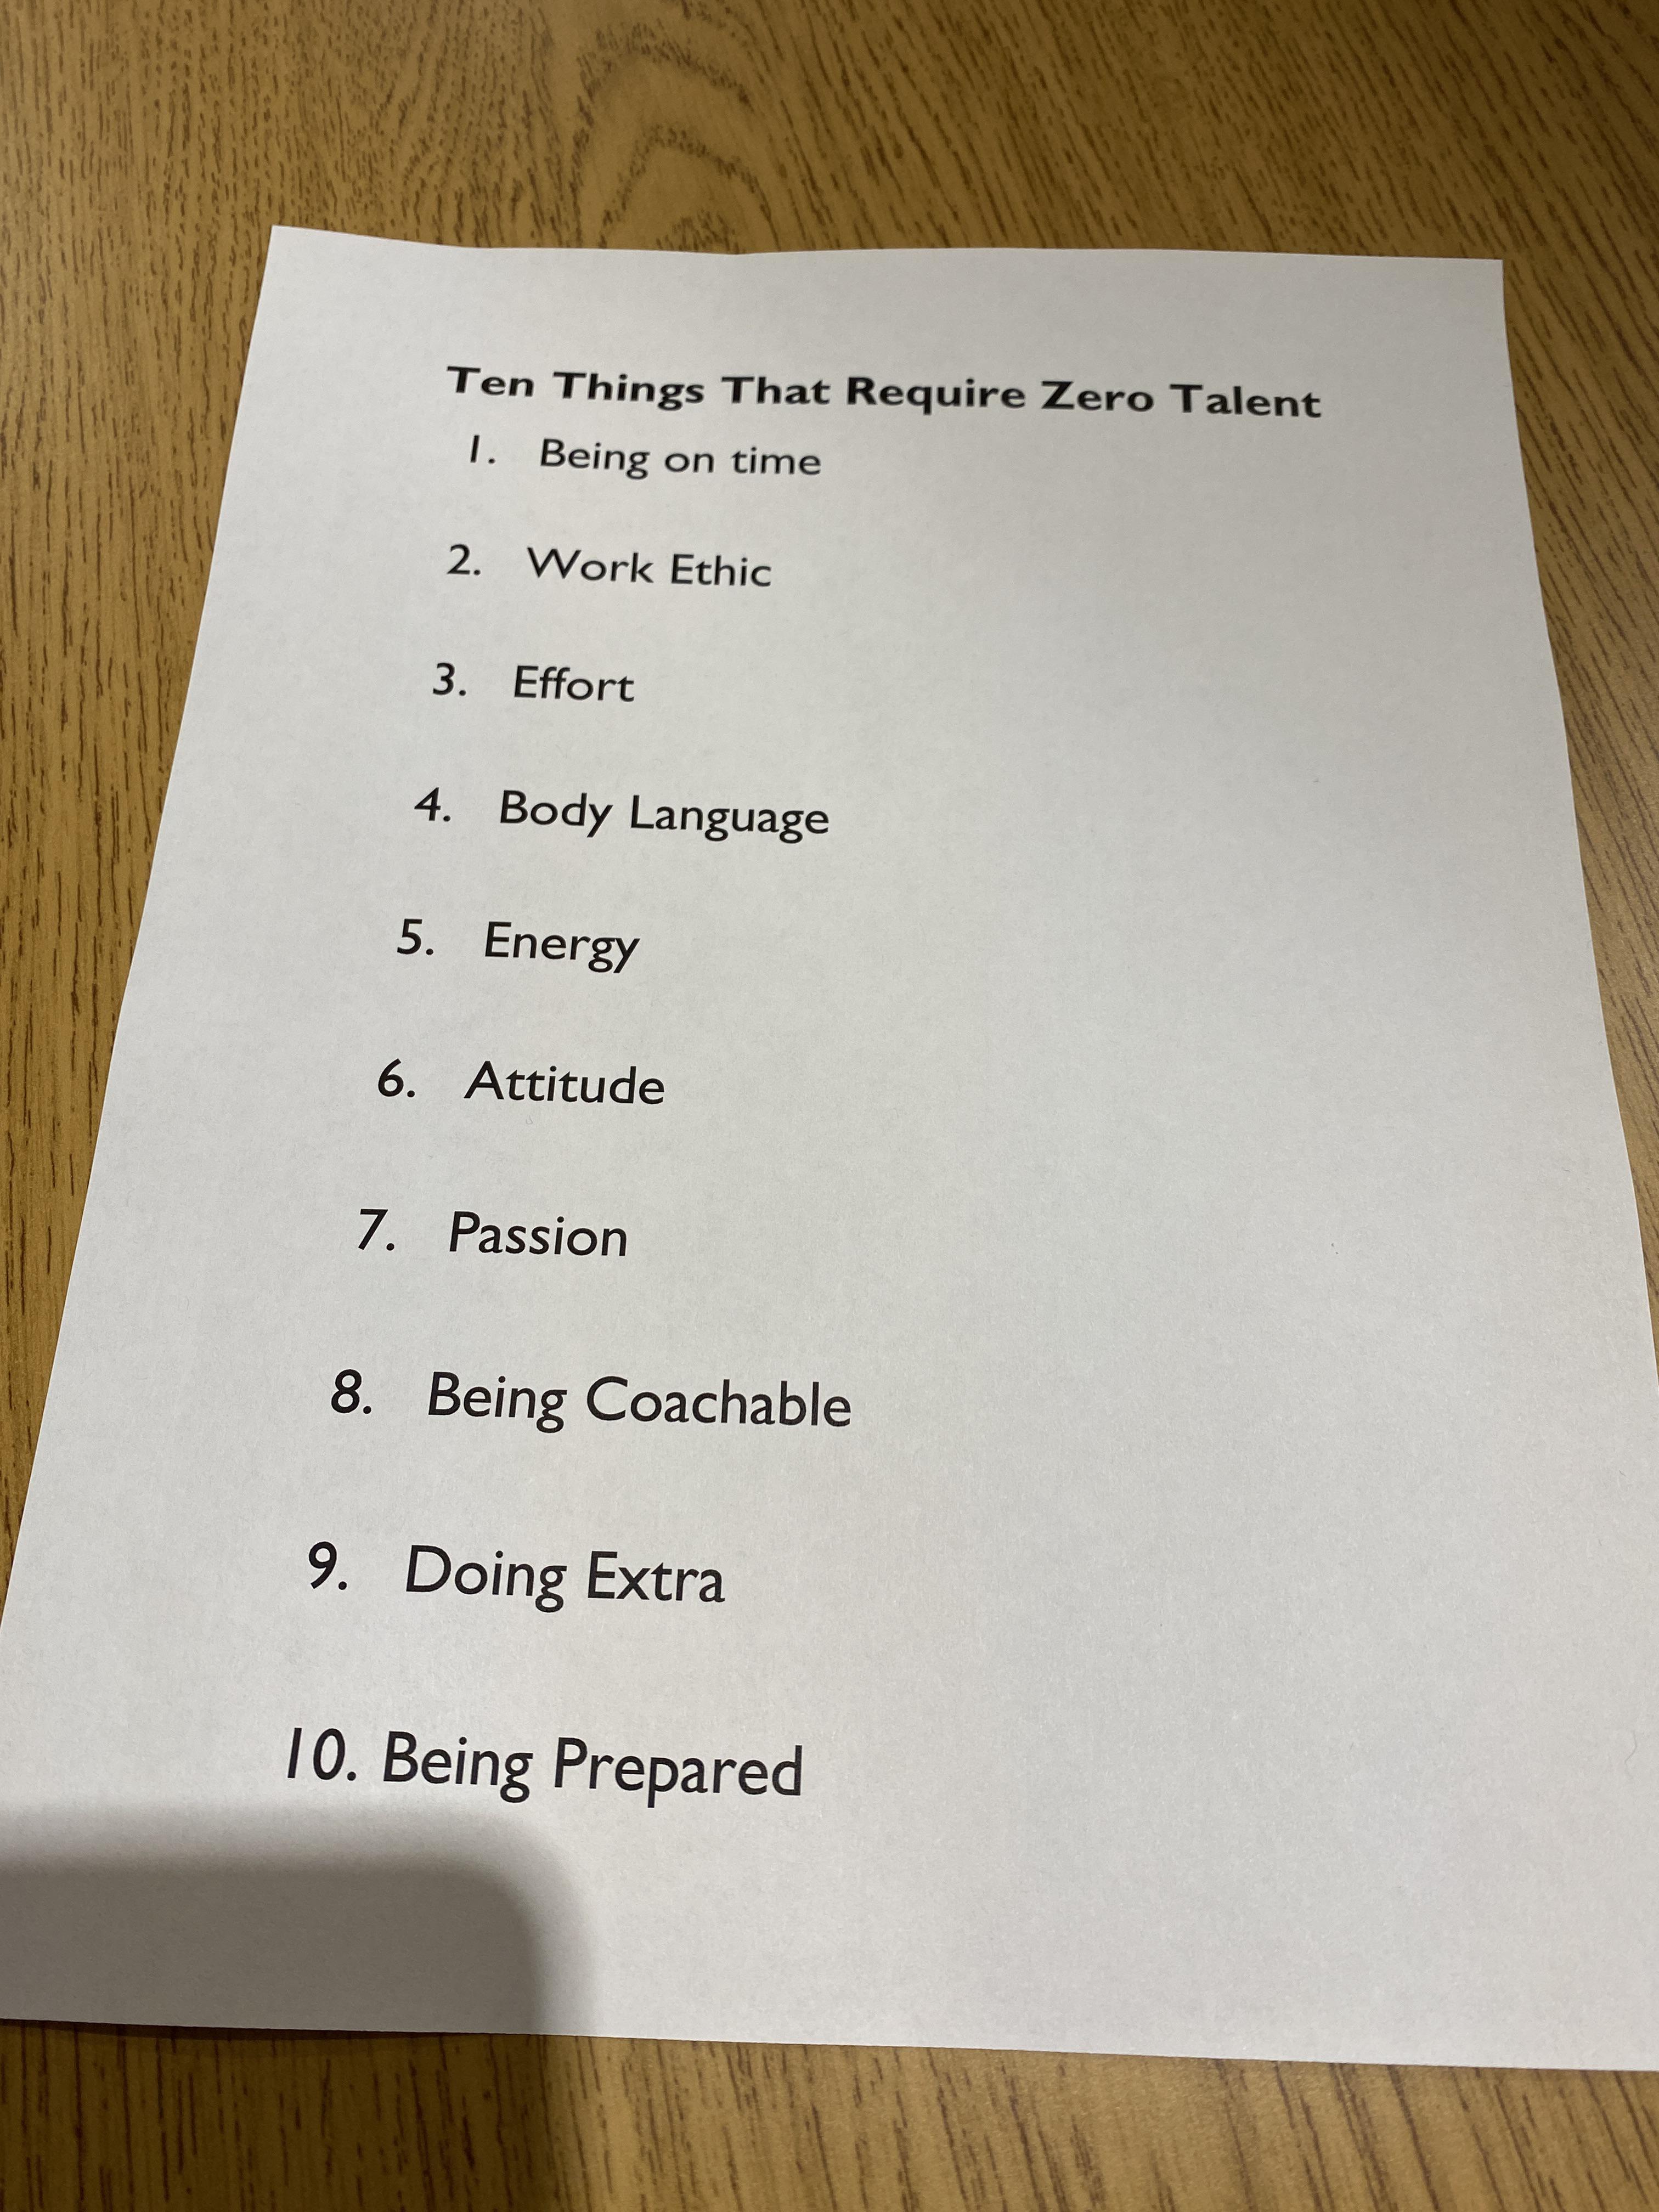 anti-work memes reddit - paper - Ten Things That Require Zero Talent 1. Being on time 2. Work Ethic 3. Effort 4. Body Language 5. Energy 6. Attitude 7. Passion 8. Being Coachable 9. Doing Extra 10. Being Prepared